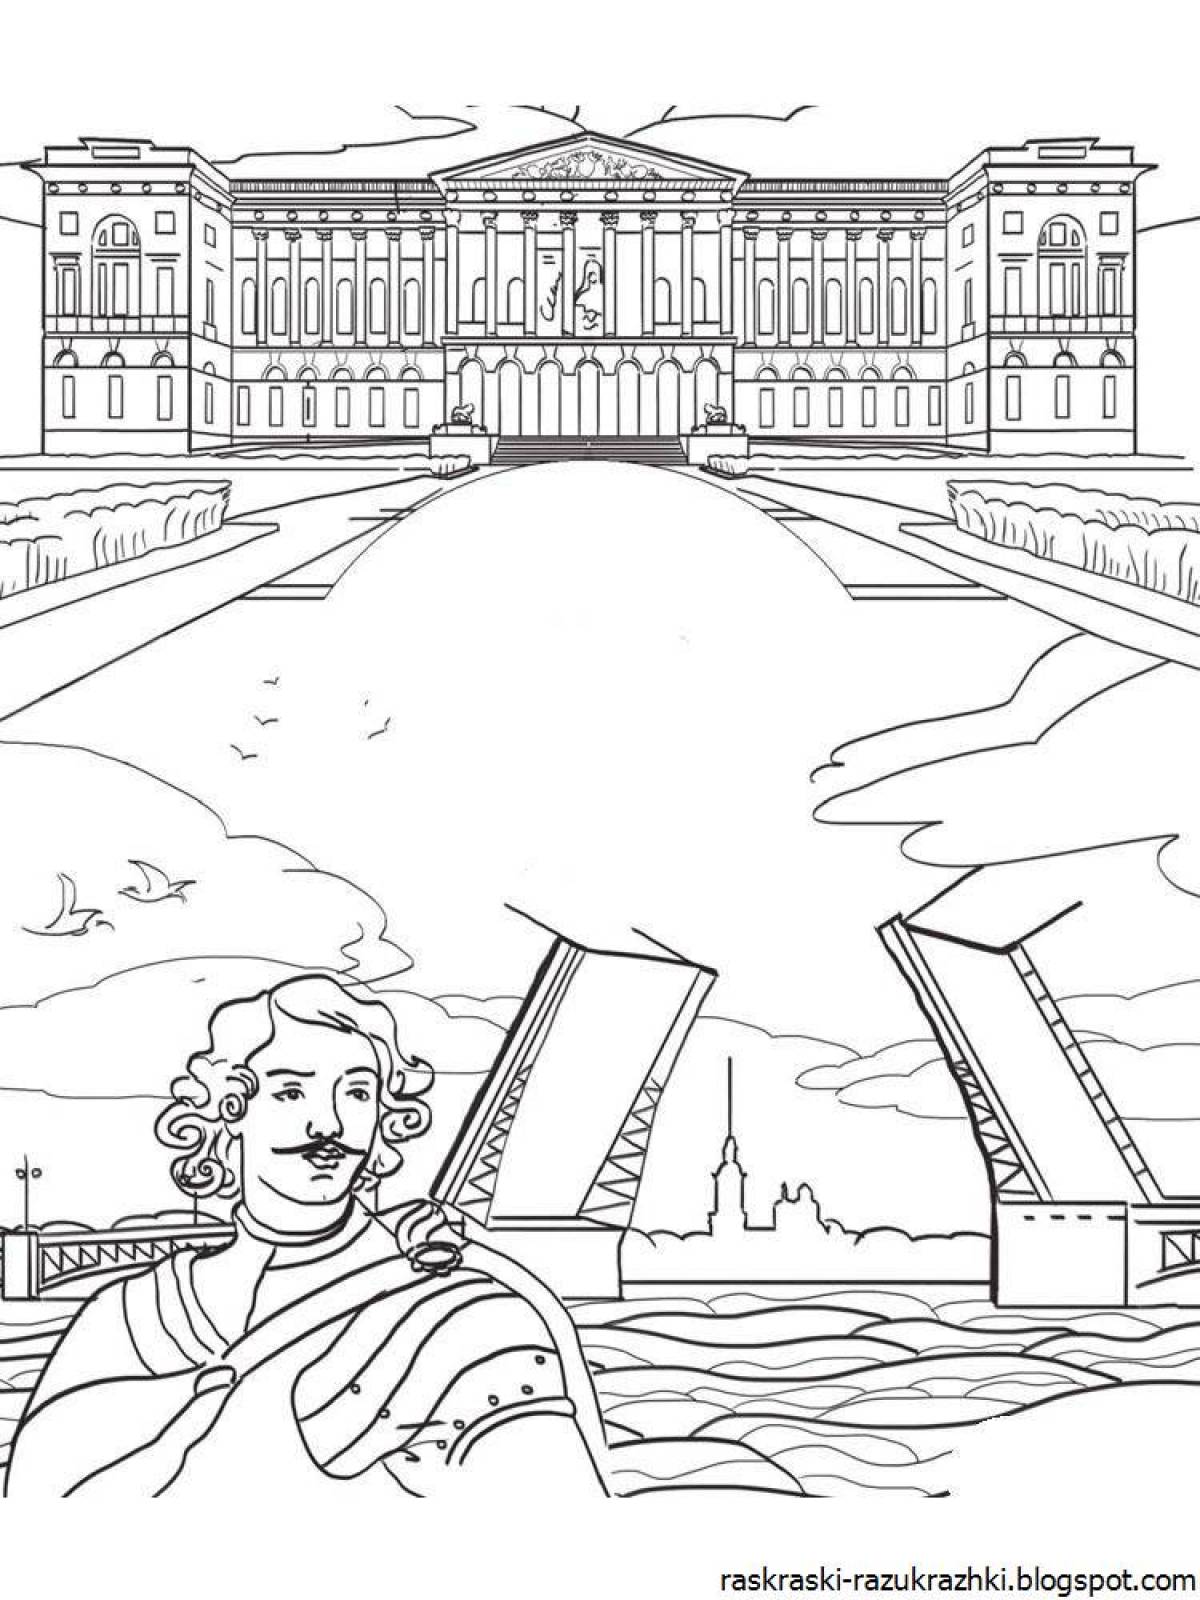 Exciting st. petersburg coloring book